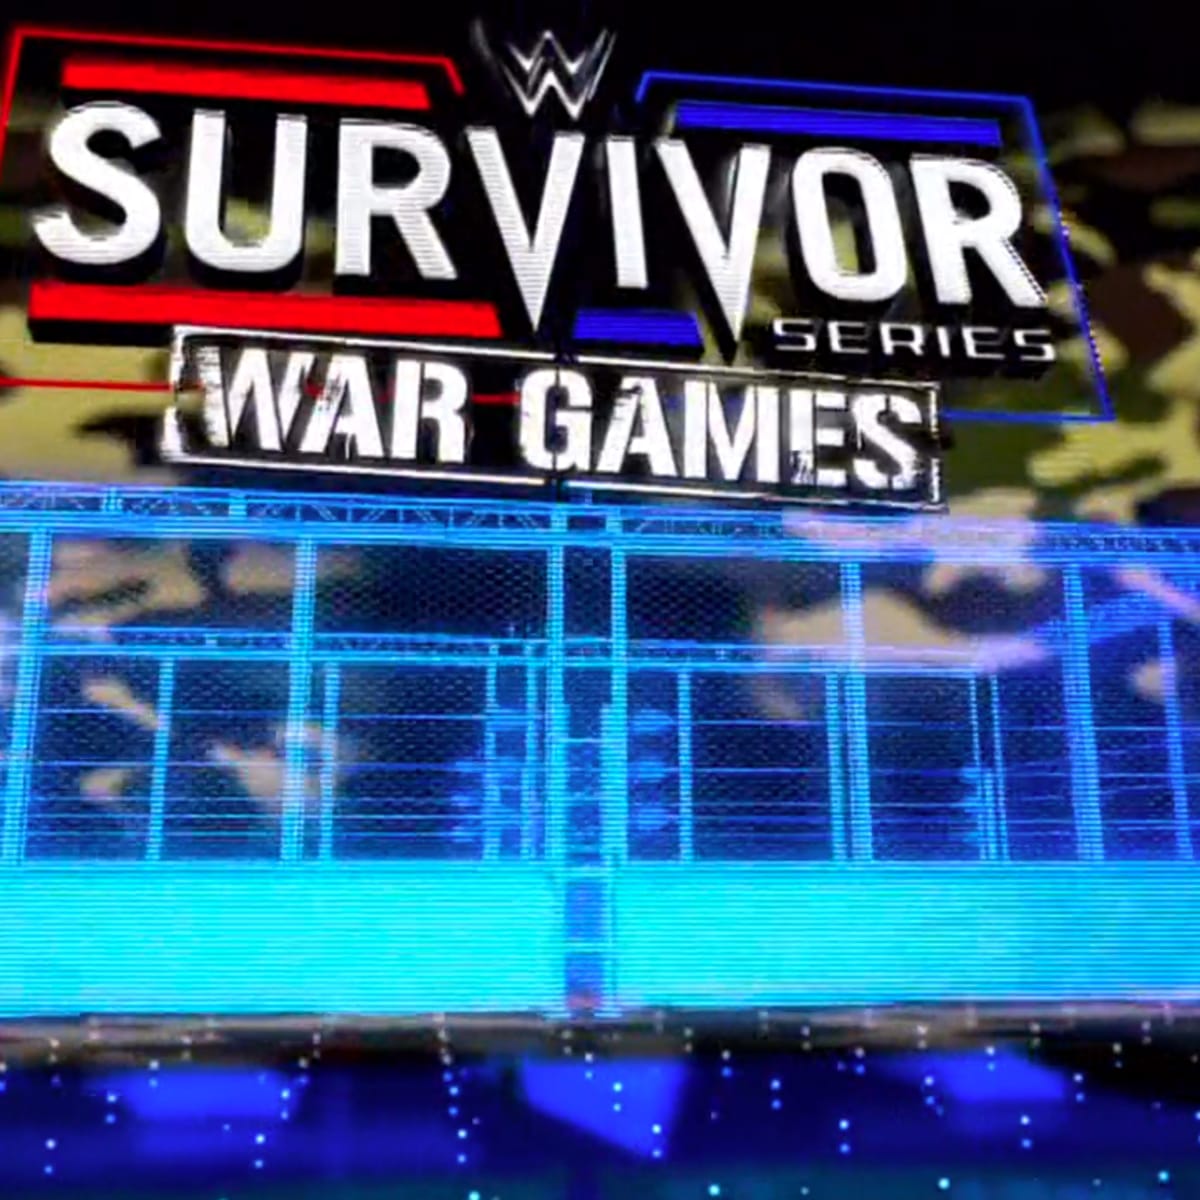 How the War Games match at WWE Survivor Series 2023 could play out